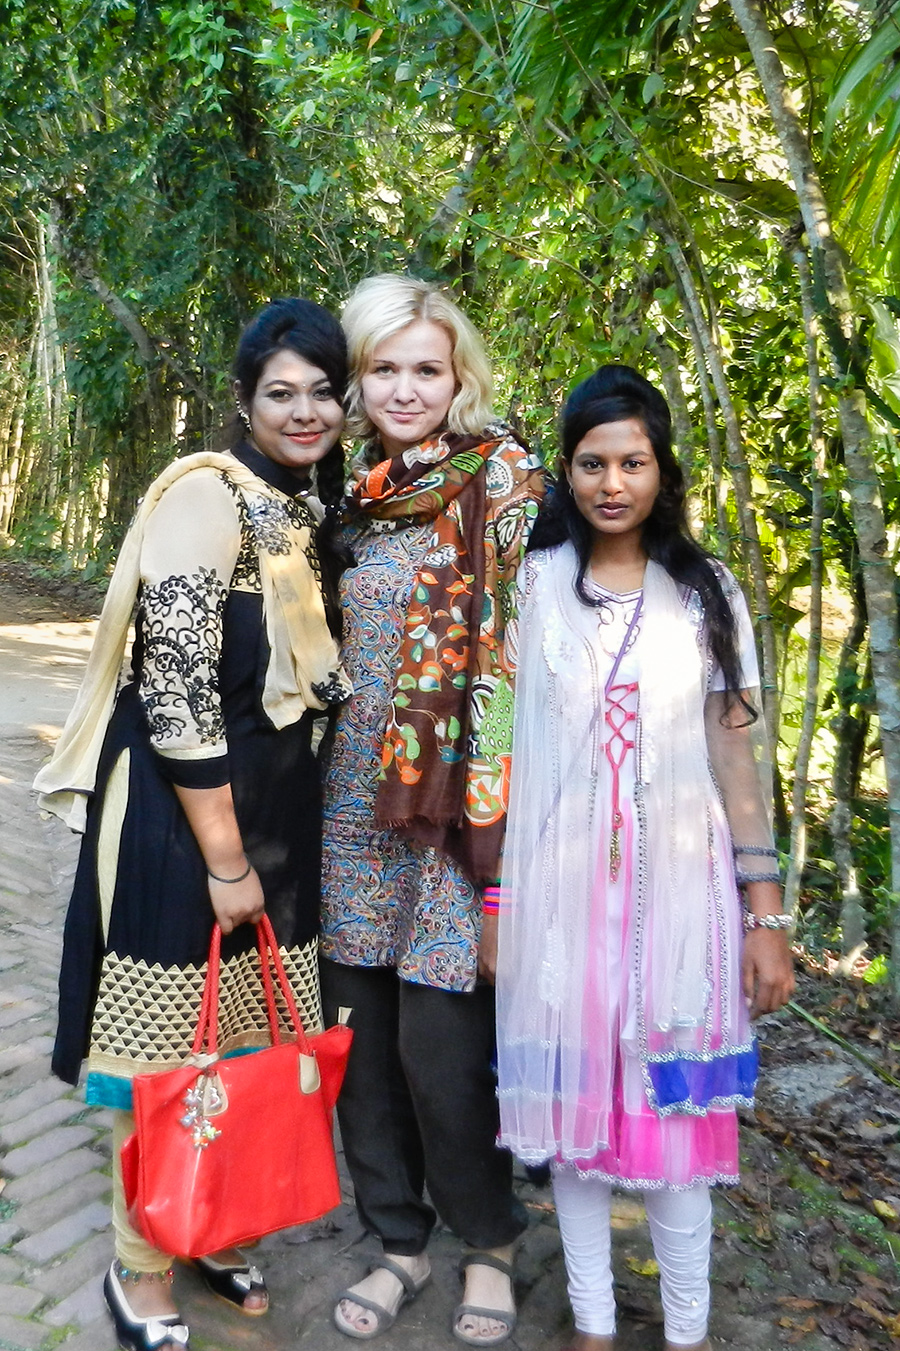 Photo shooting with the locals in Bangladesh.